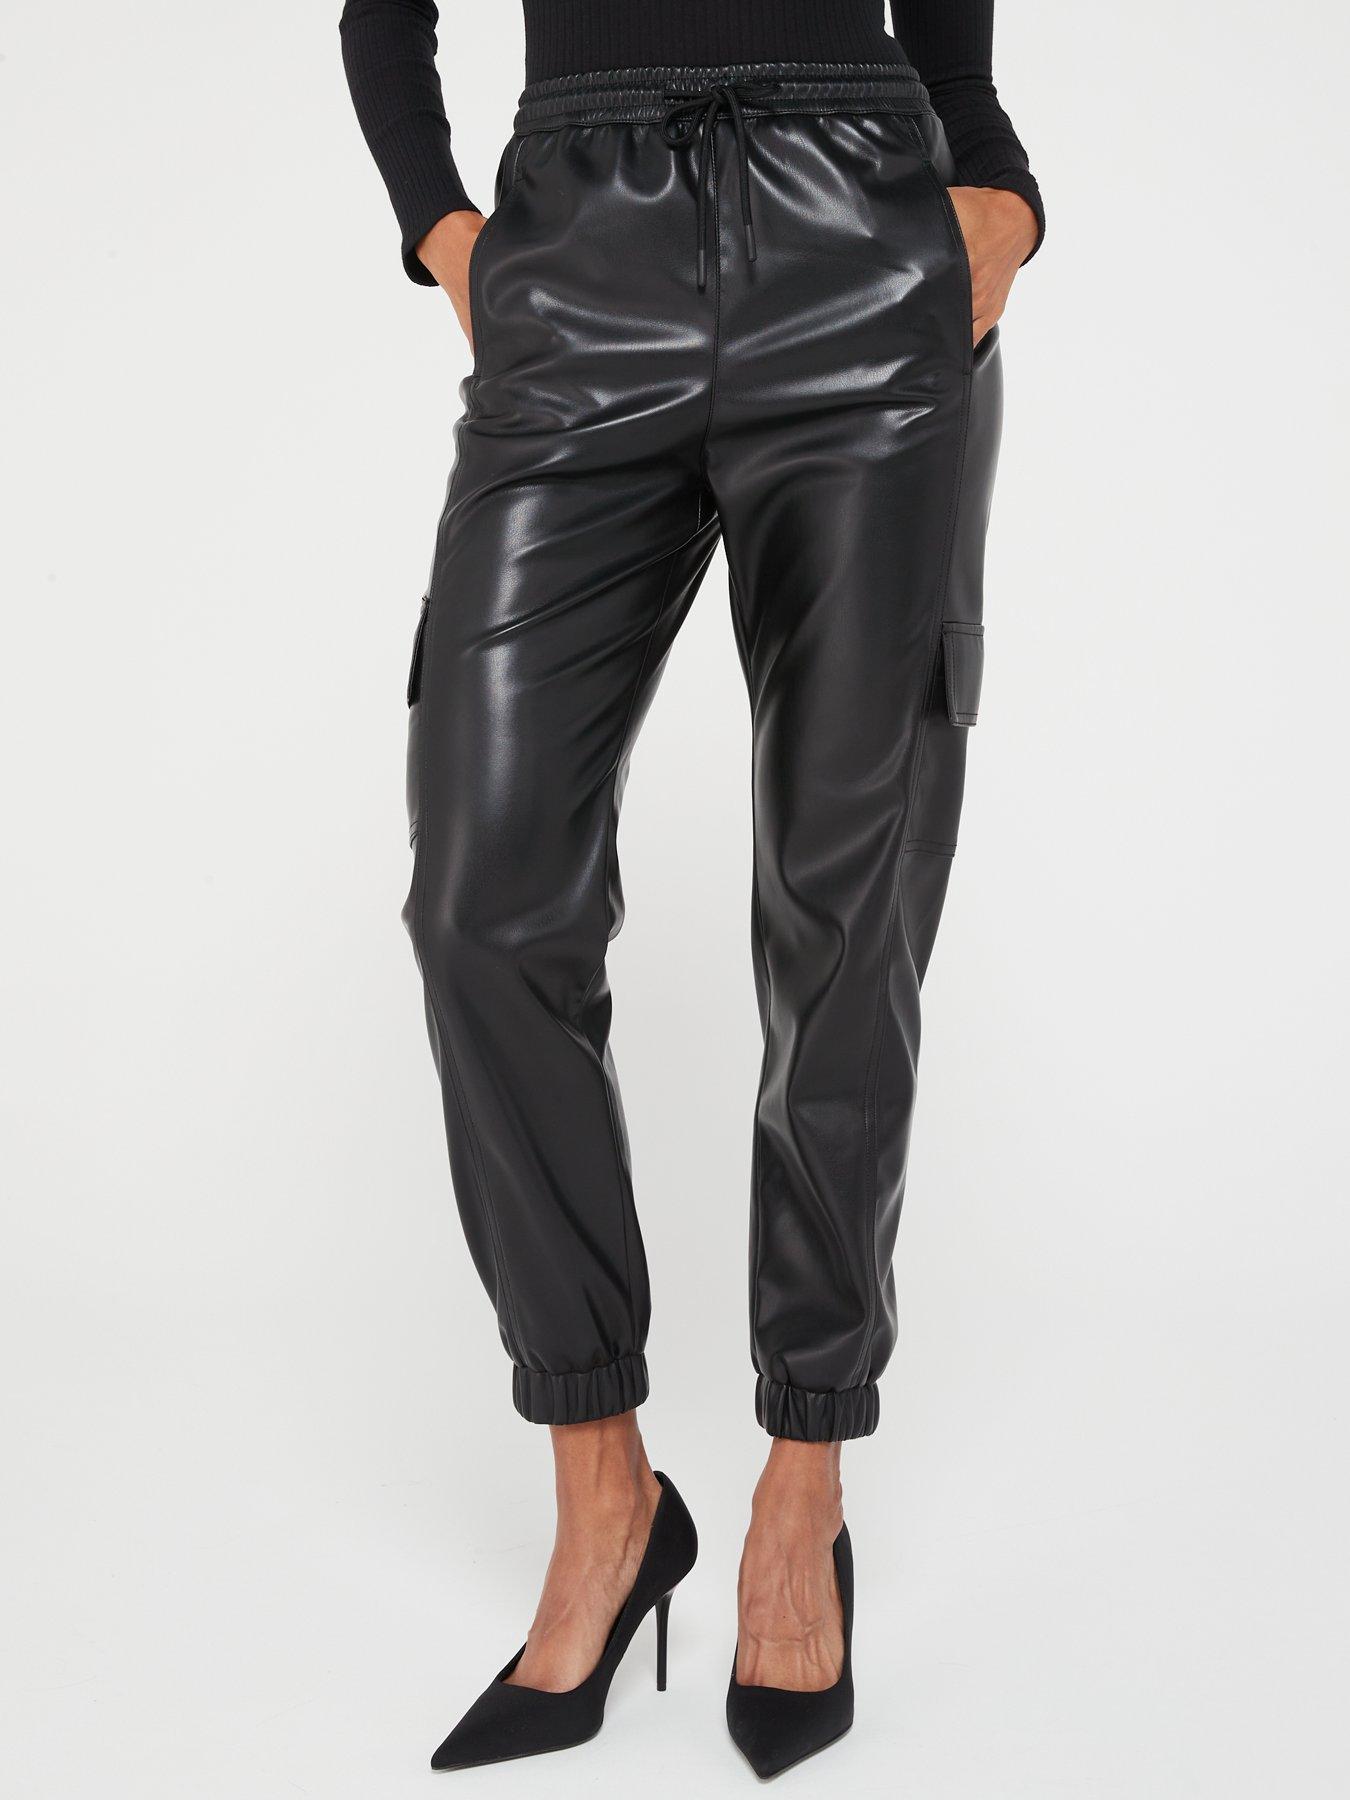 V by Very Faux Leather Utility Joggers - Black